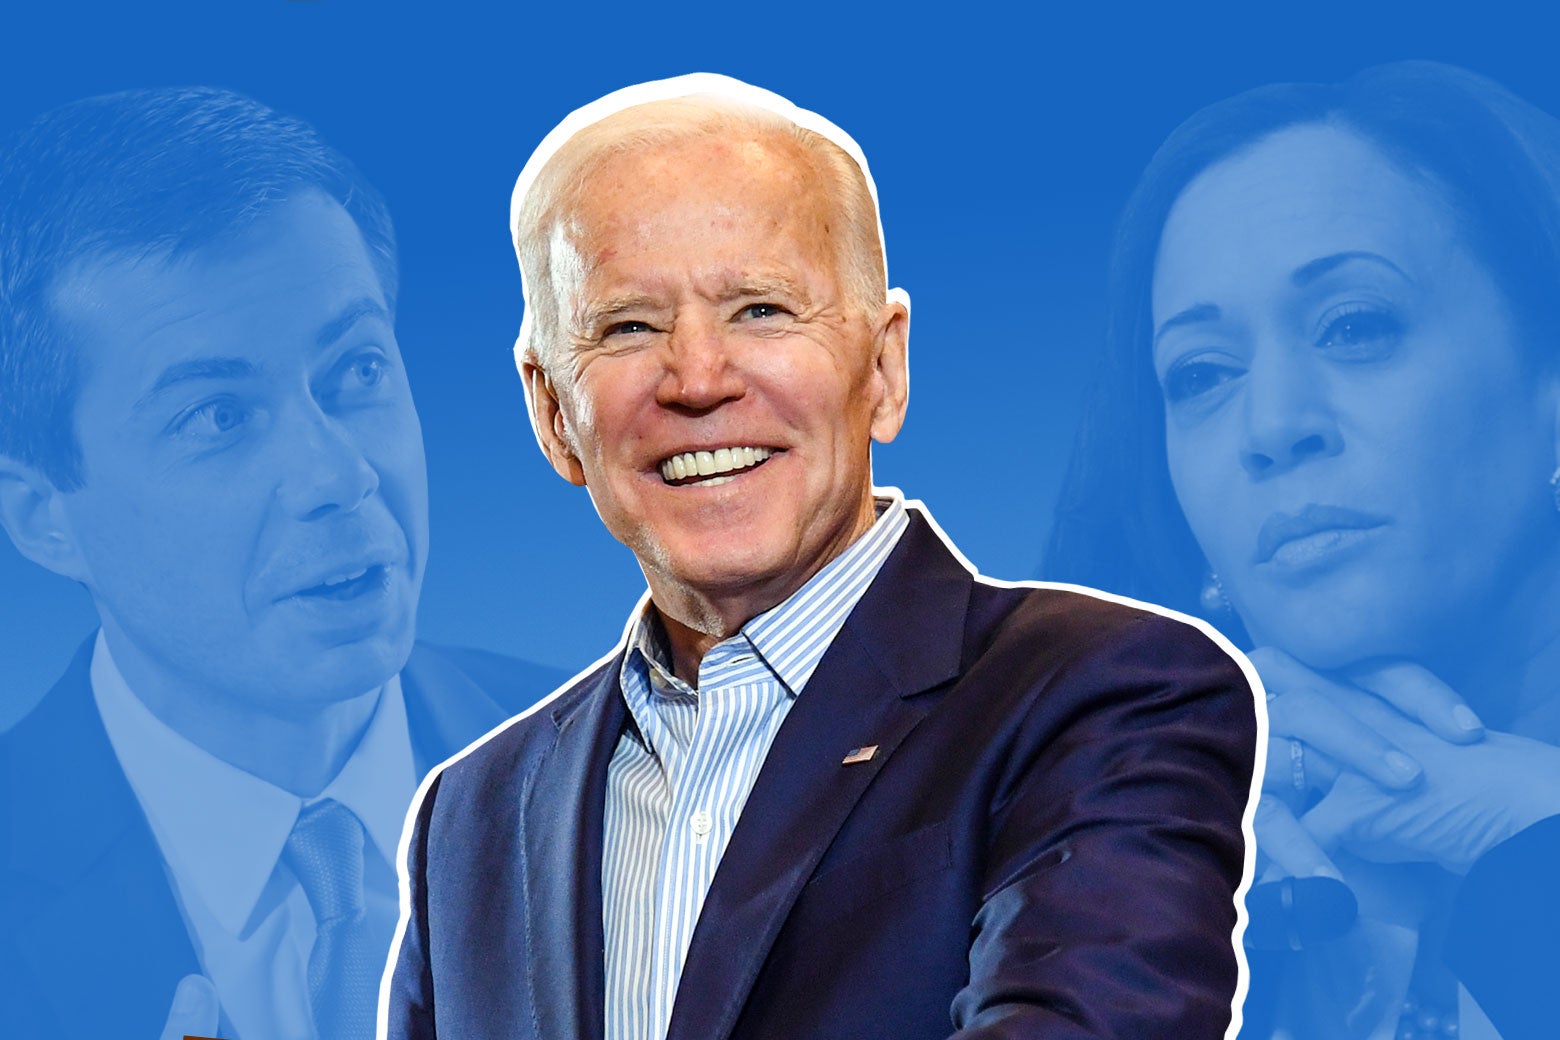 Joe Biden does that grin of his, with Pete Buttigieg and Kamala Harris to the side and in the background.